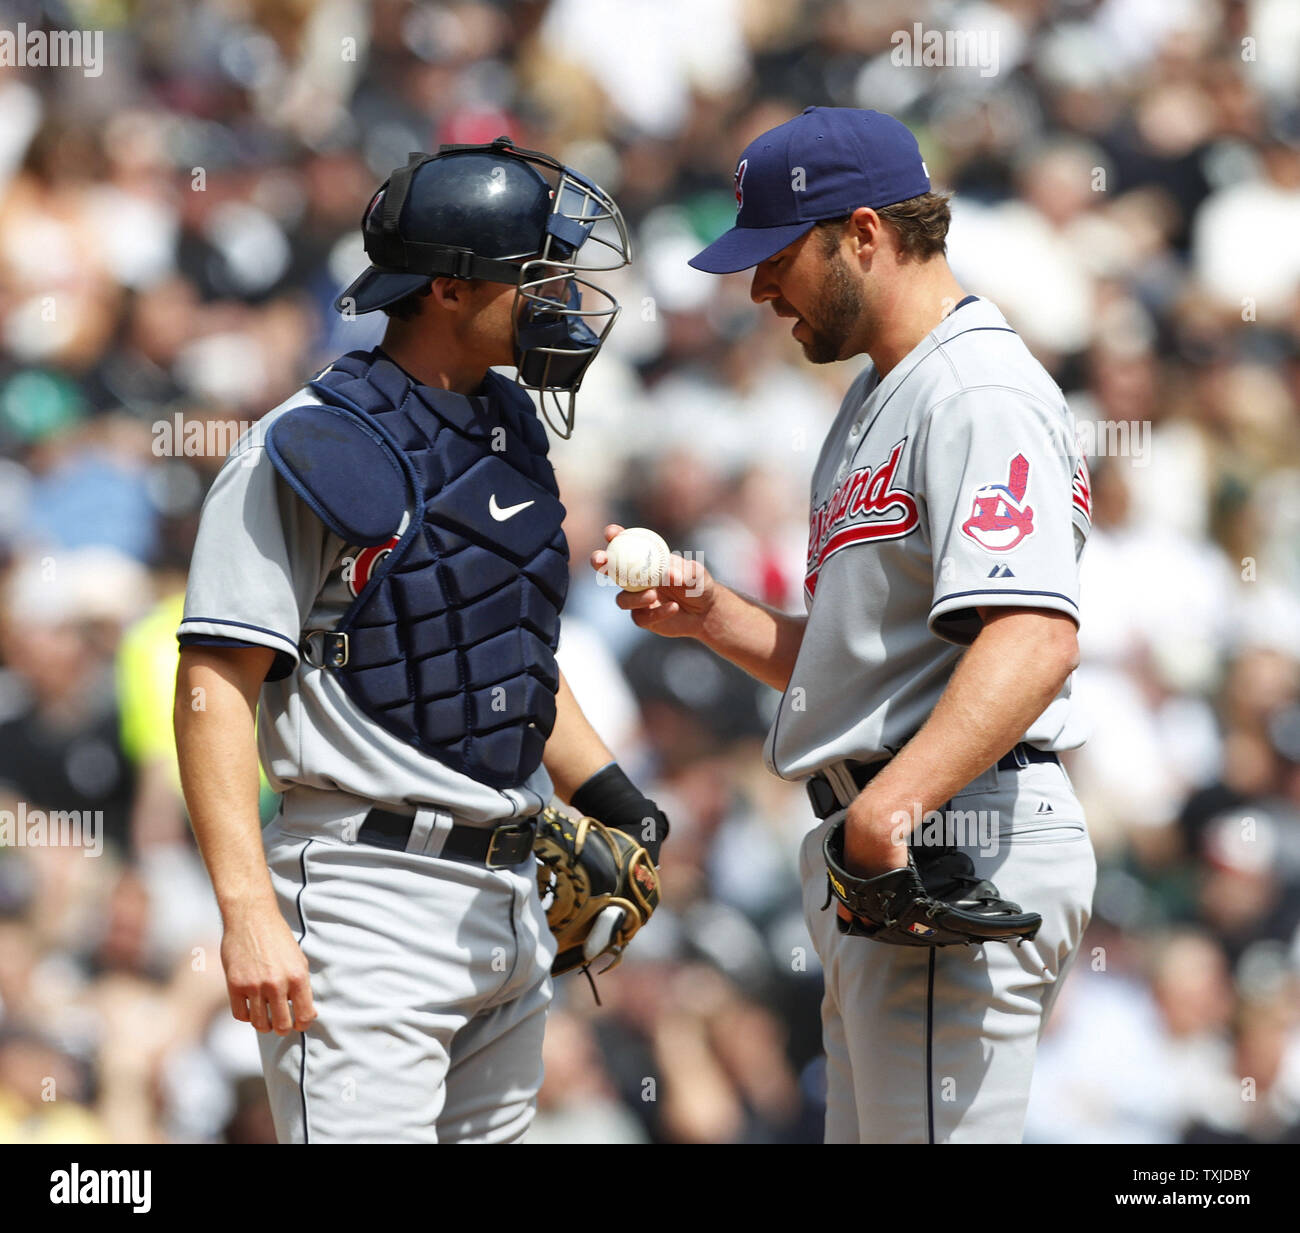 Cleveland Indians catcher Lou Marson talks with pitcher Jake Westbrook during the third inning against the Chicago White Sox on Opening Day at U.S. Cellular Field in Chicago on April 5, 2010. The White Sox won 6-0.     UPI/Brian Kersey Stock Photo